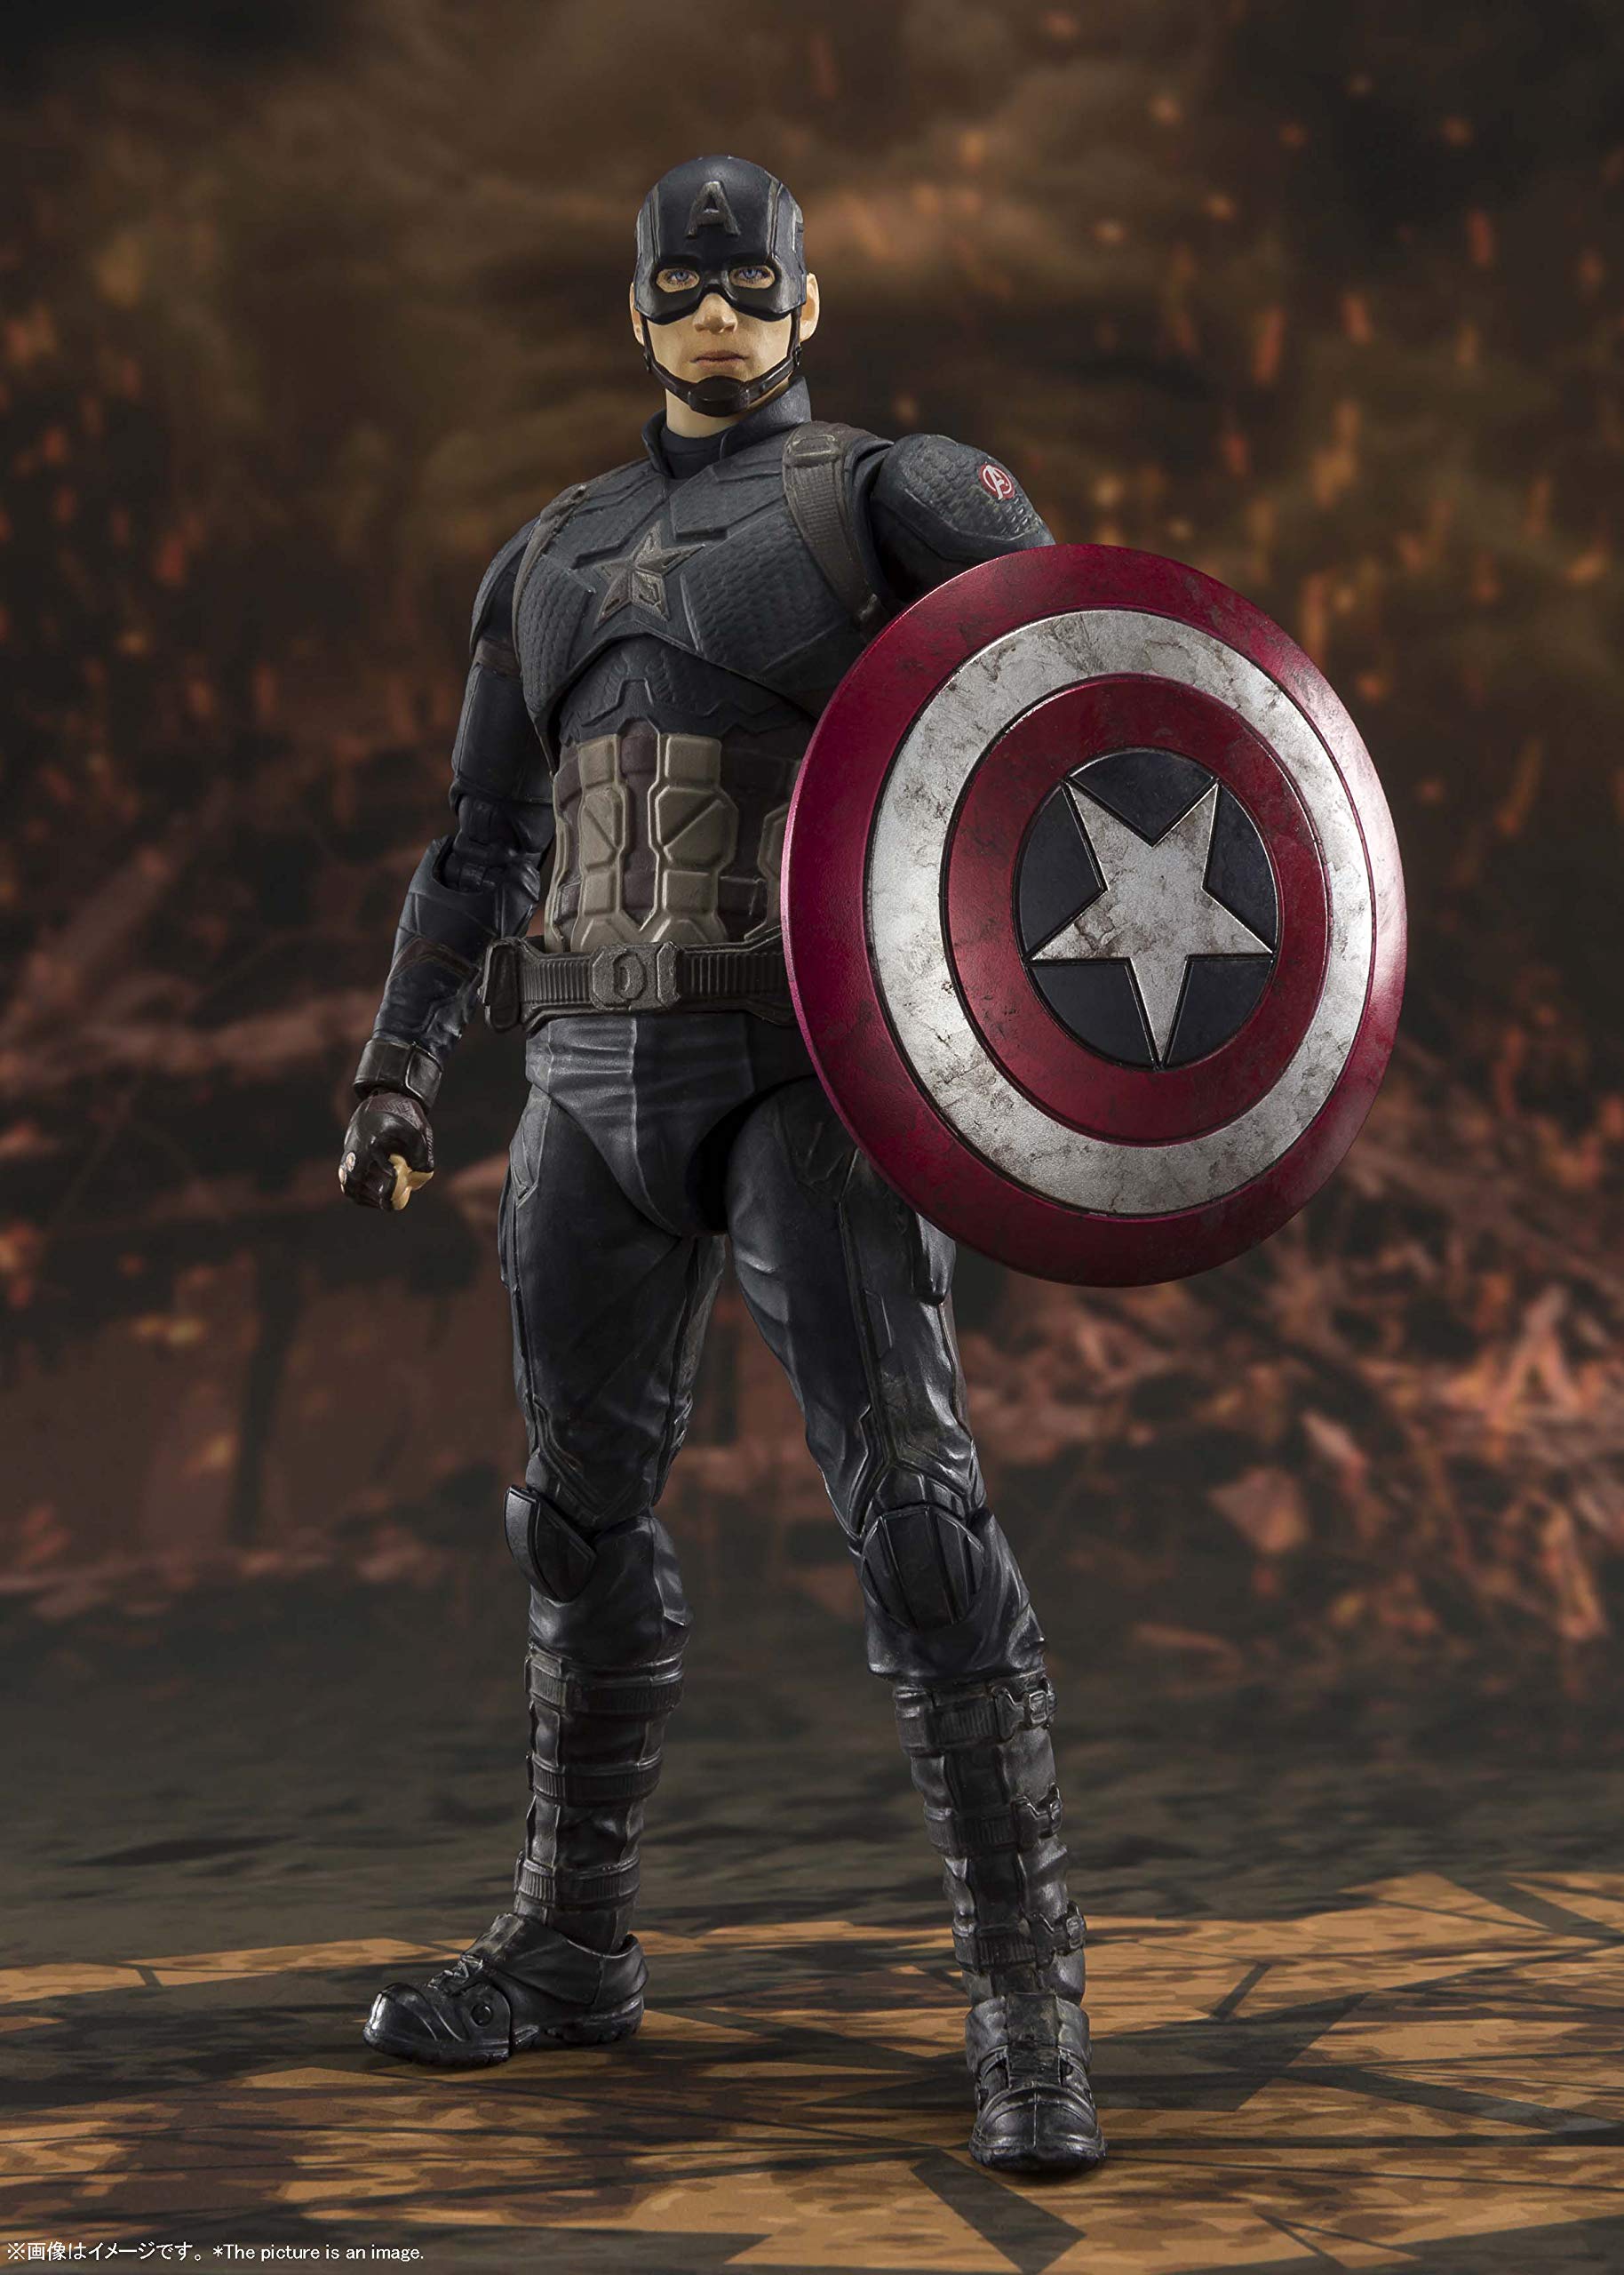 TAMASHII NATIONS S.H. Figuarts Captain America -Final Battle Edition - Avengers: Endgame, Multi, Approx. 150 mm